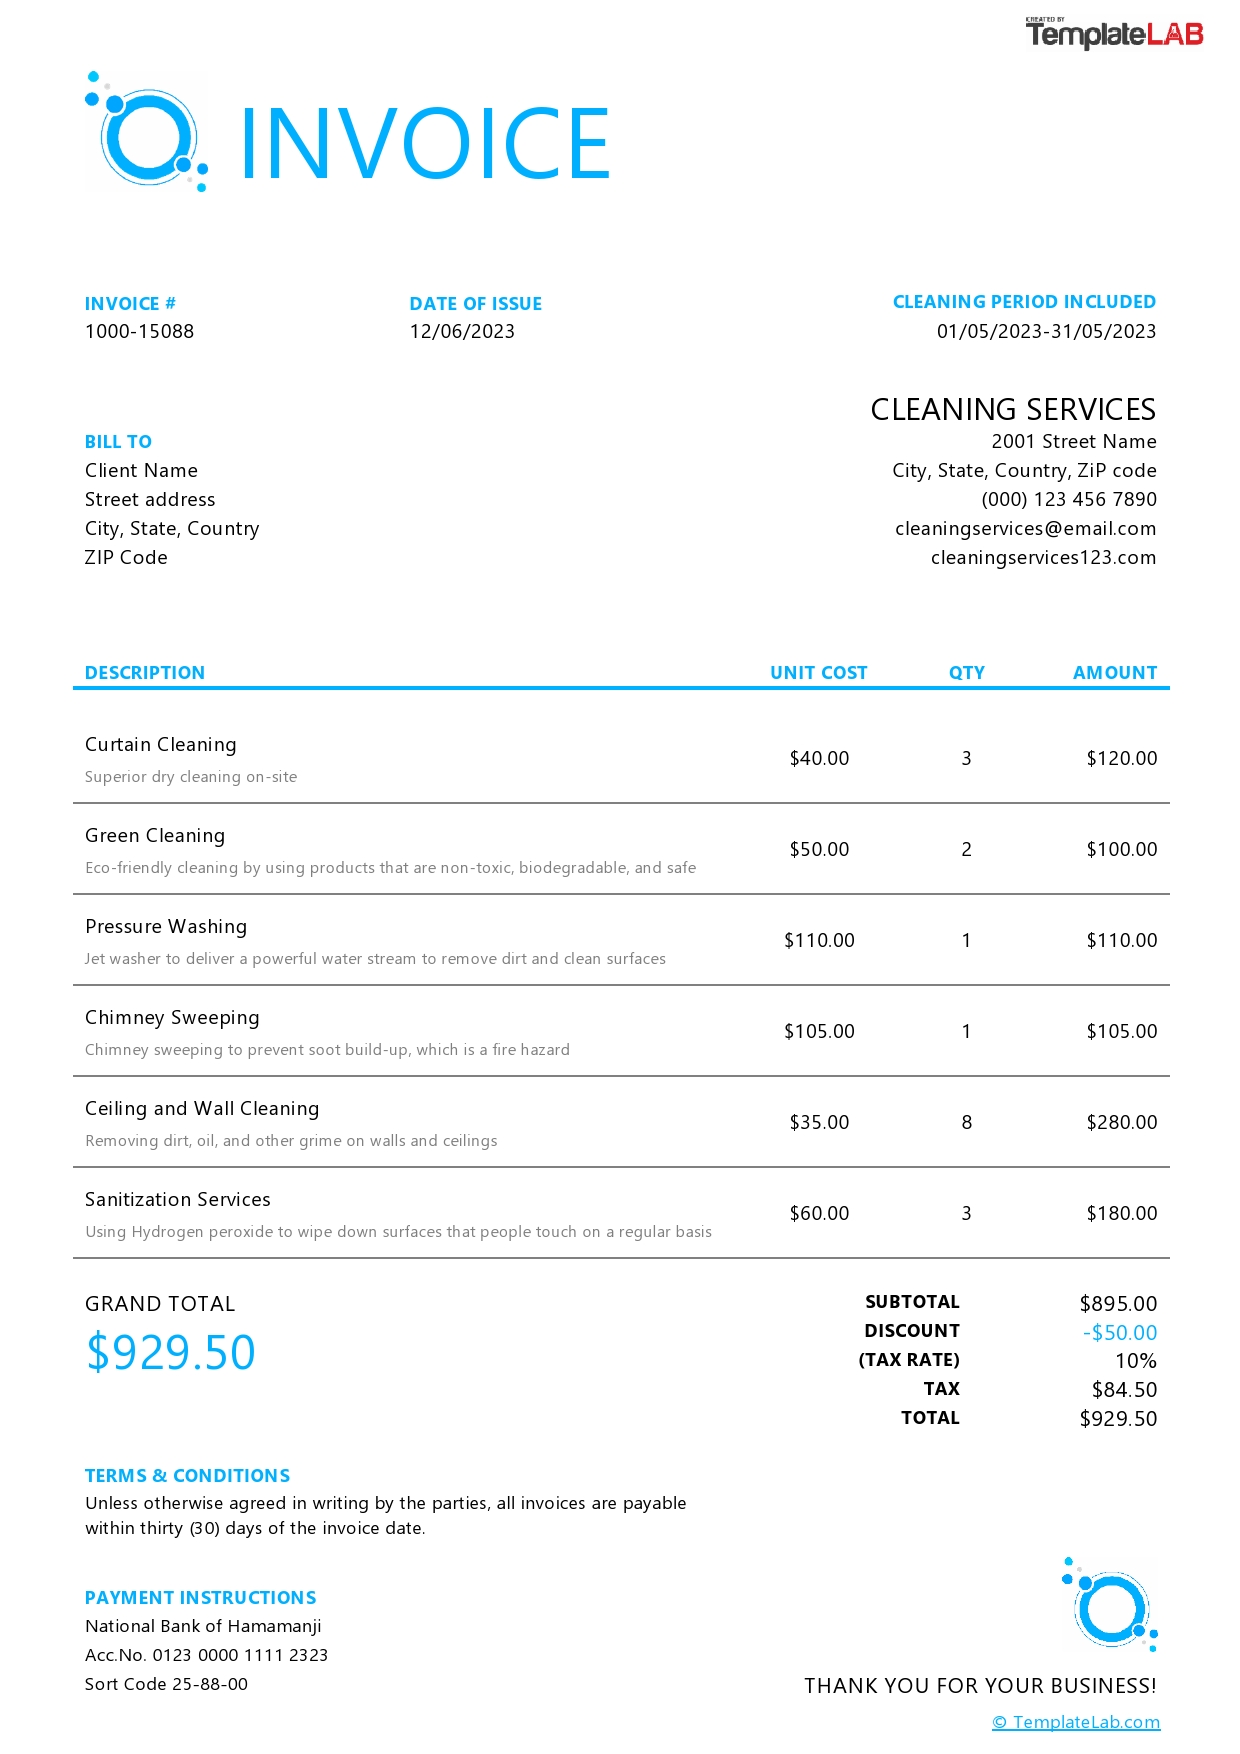 Free Cleaning Invoice Template